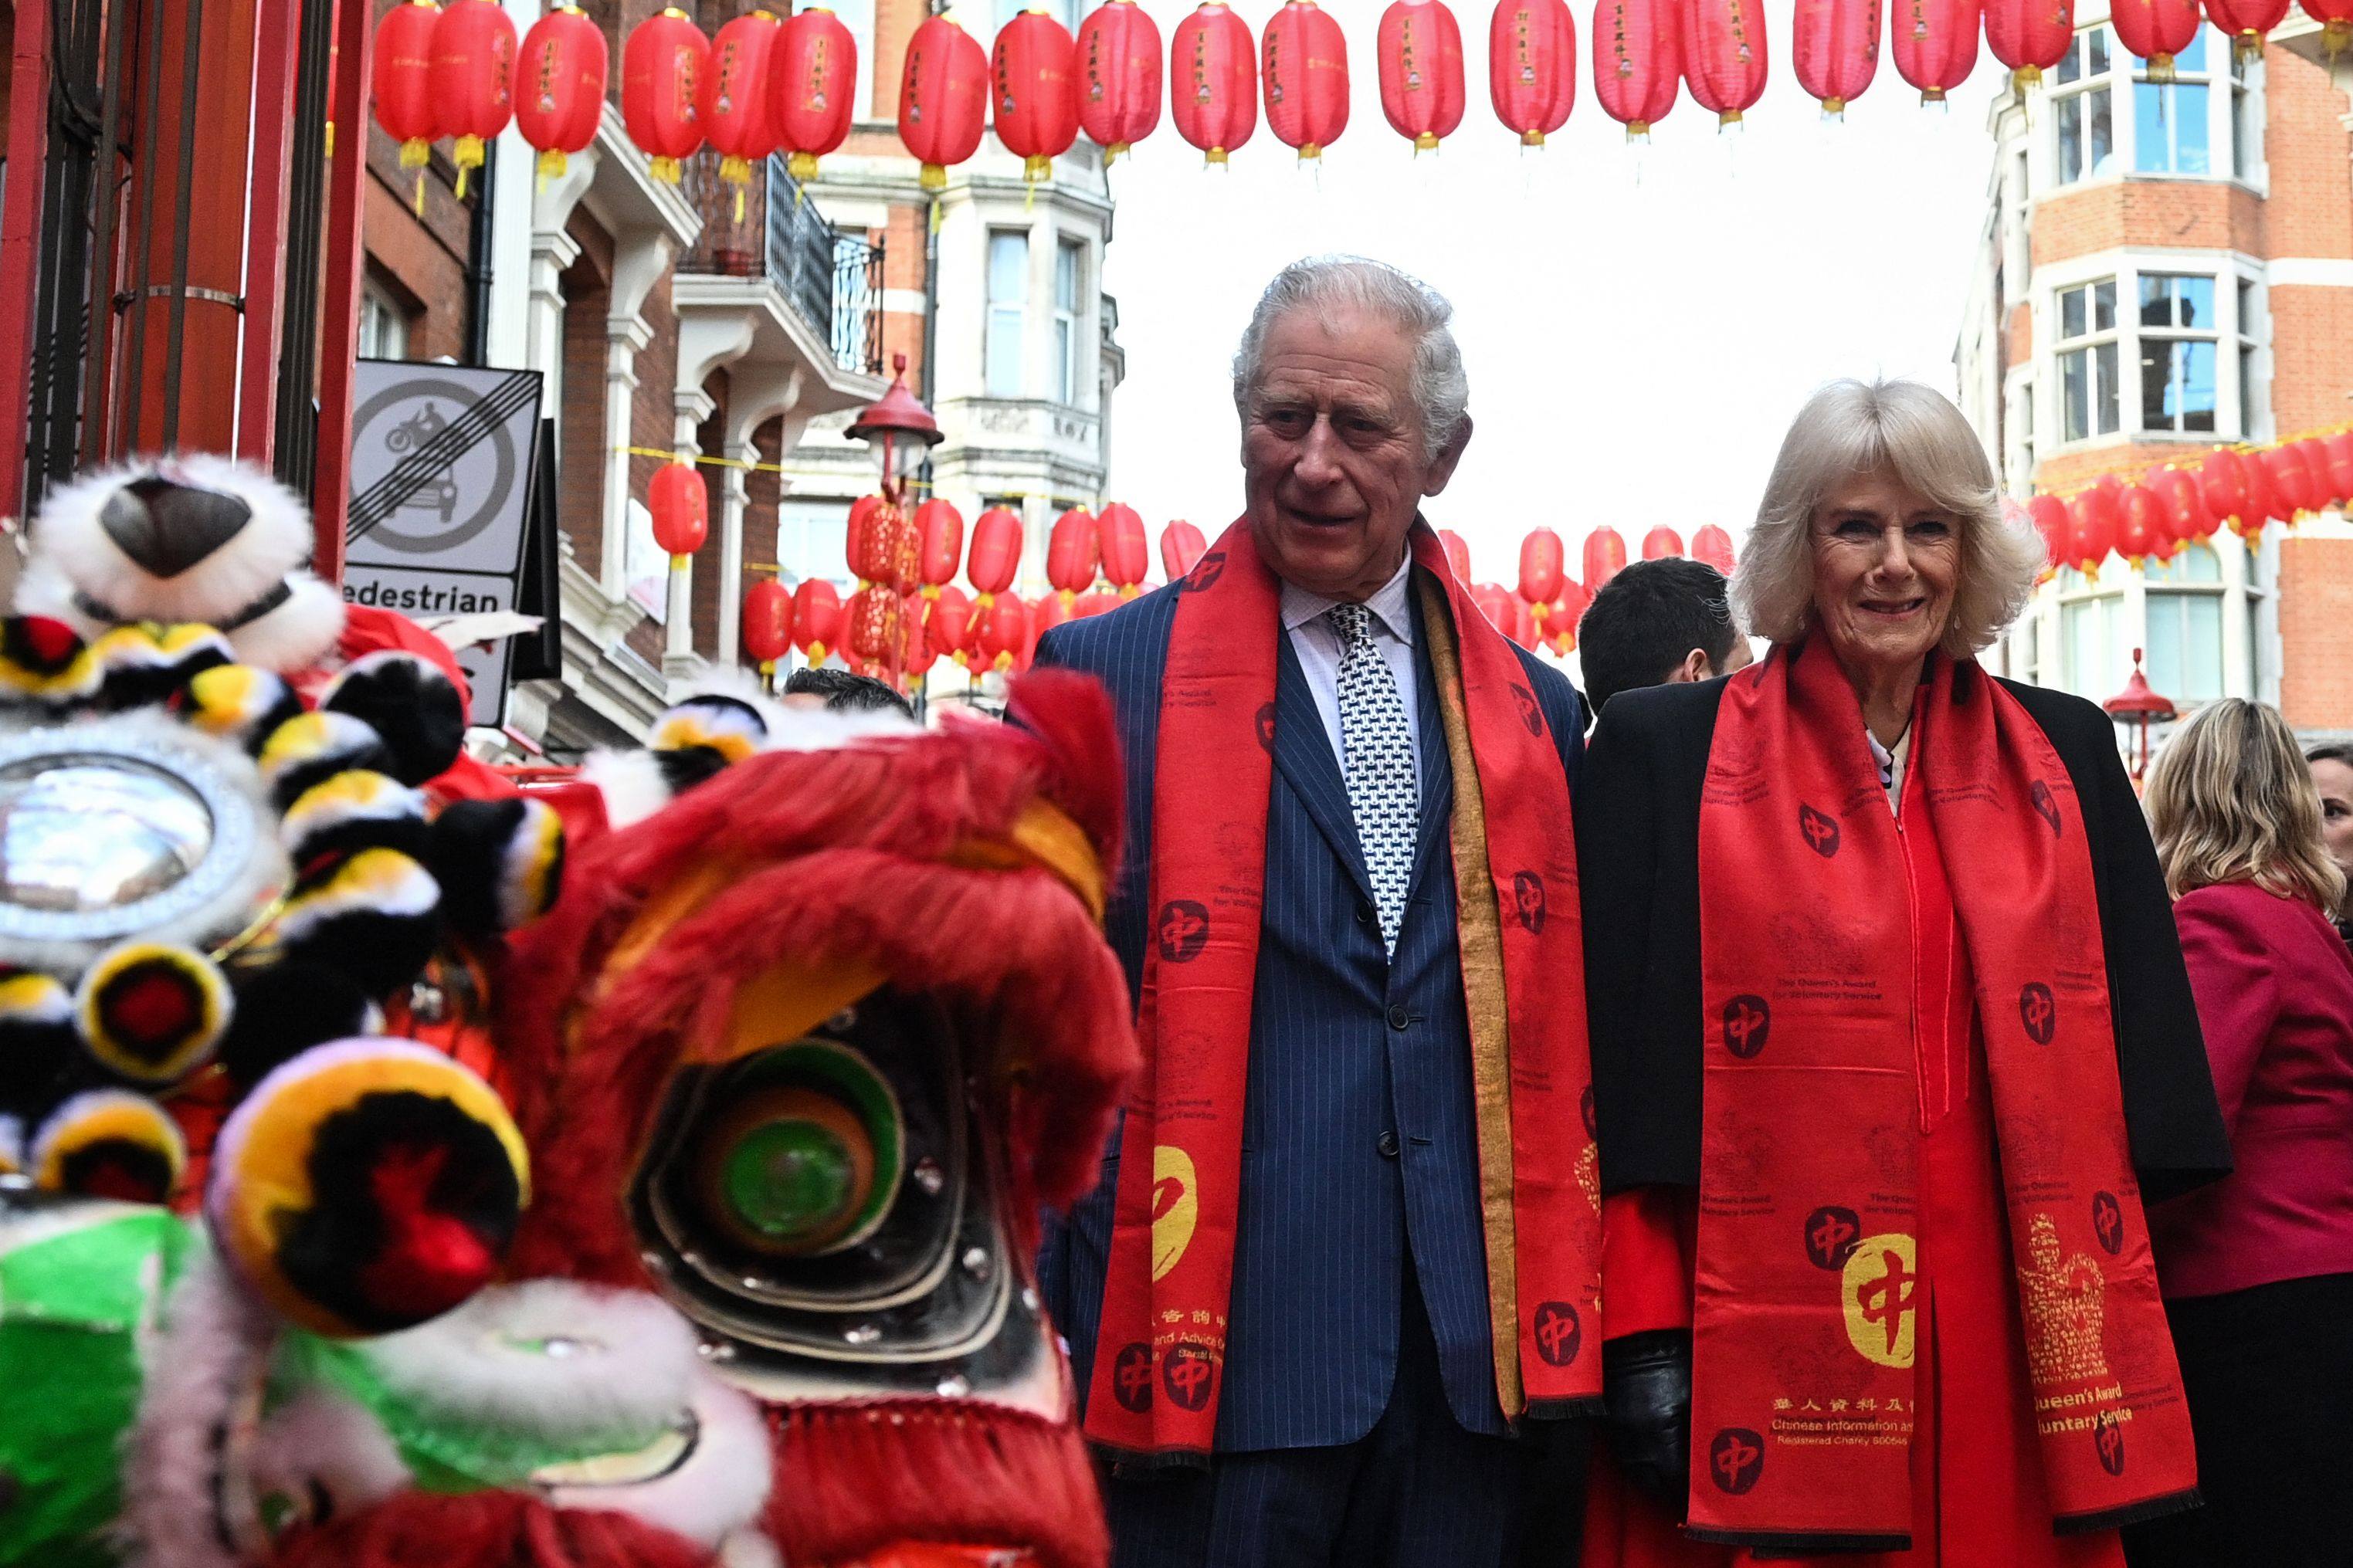 Britain’s Prince Charles and Camilla visit London’s Chinatown in February 2022. London’s Chinese community held a Poon Choi event in Chinatown on Sunday, celebrating the coronation of King Charles and Queen Camilla. Photo: AFP